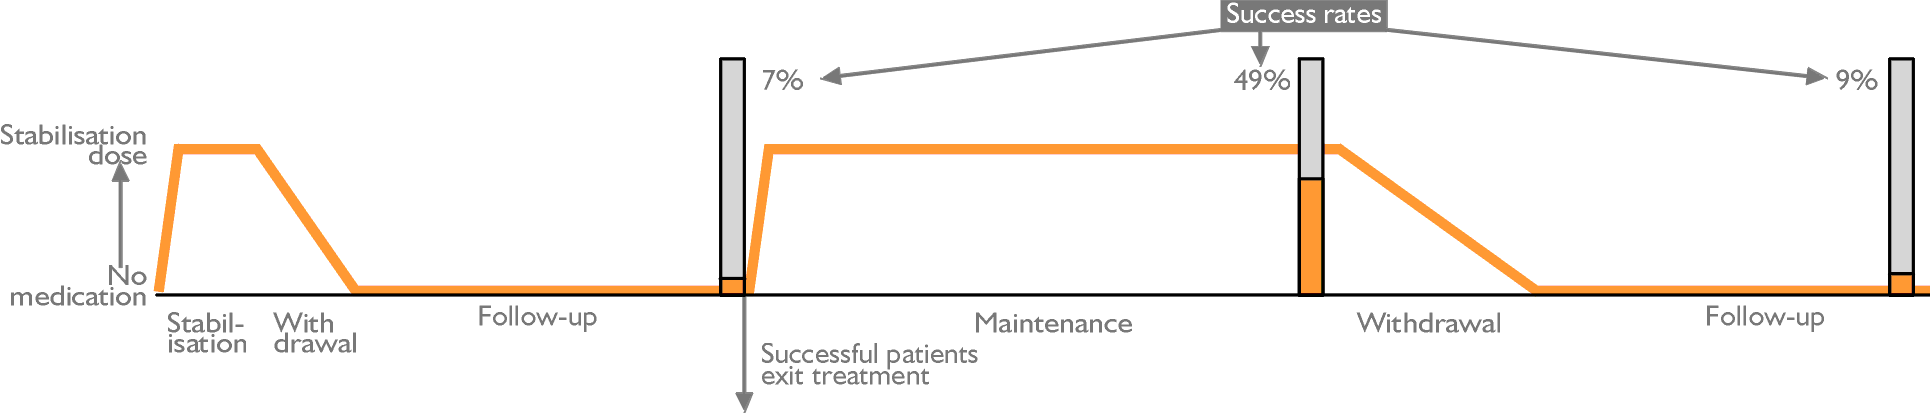 Treatment phases and success rates